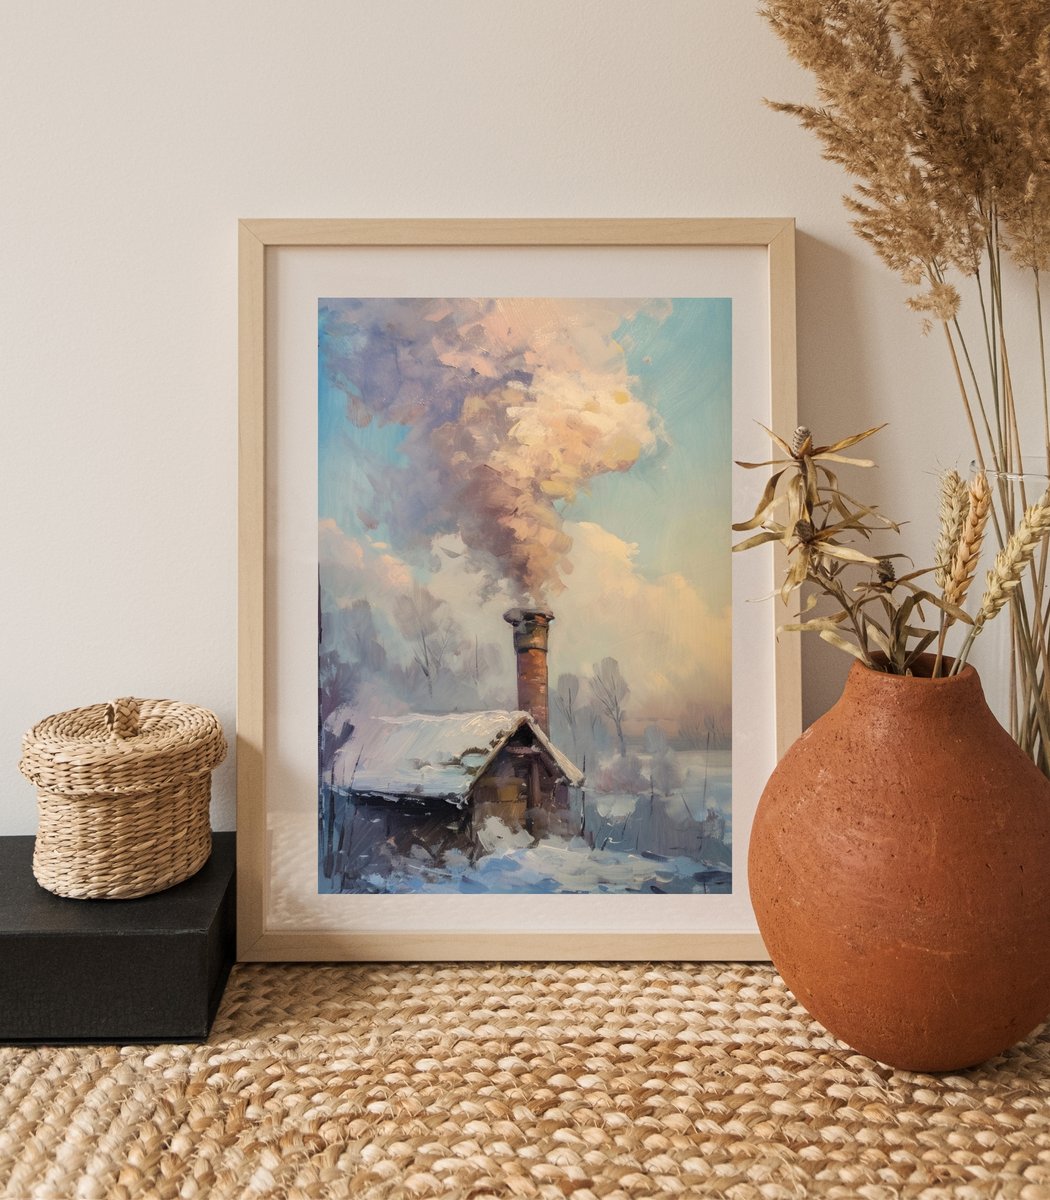 Cozy up your space with this wintry scene from Lena Art Design, where smoke swirls from a chimney into the crisp air. ❄️🏠 #WinterWarmth #CozyHomeArt #LenaArtDesign